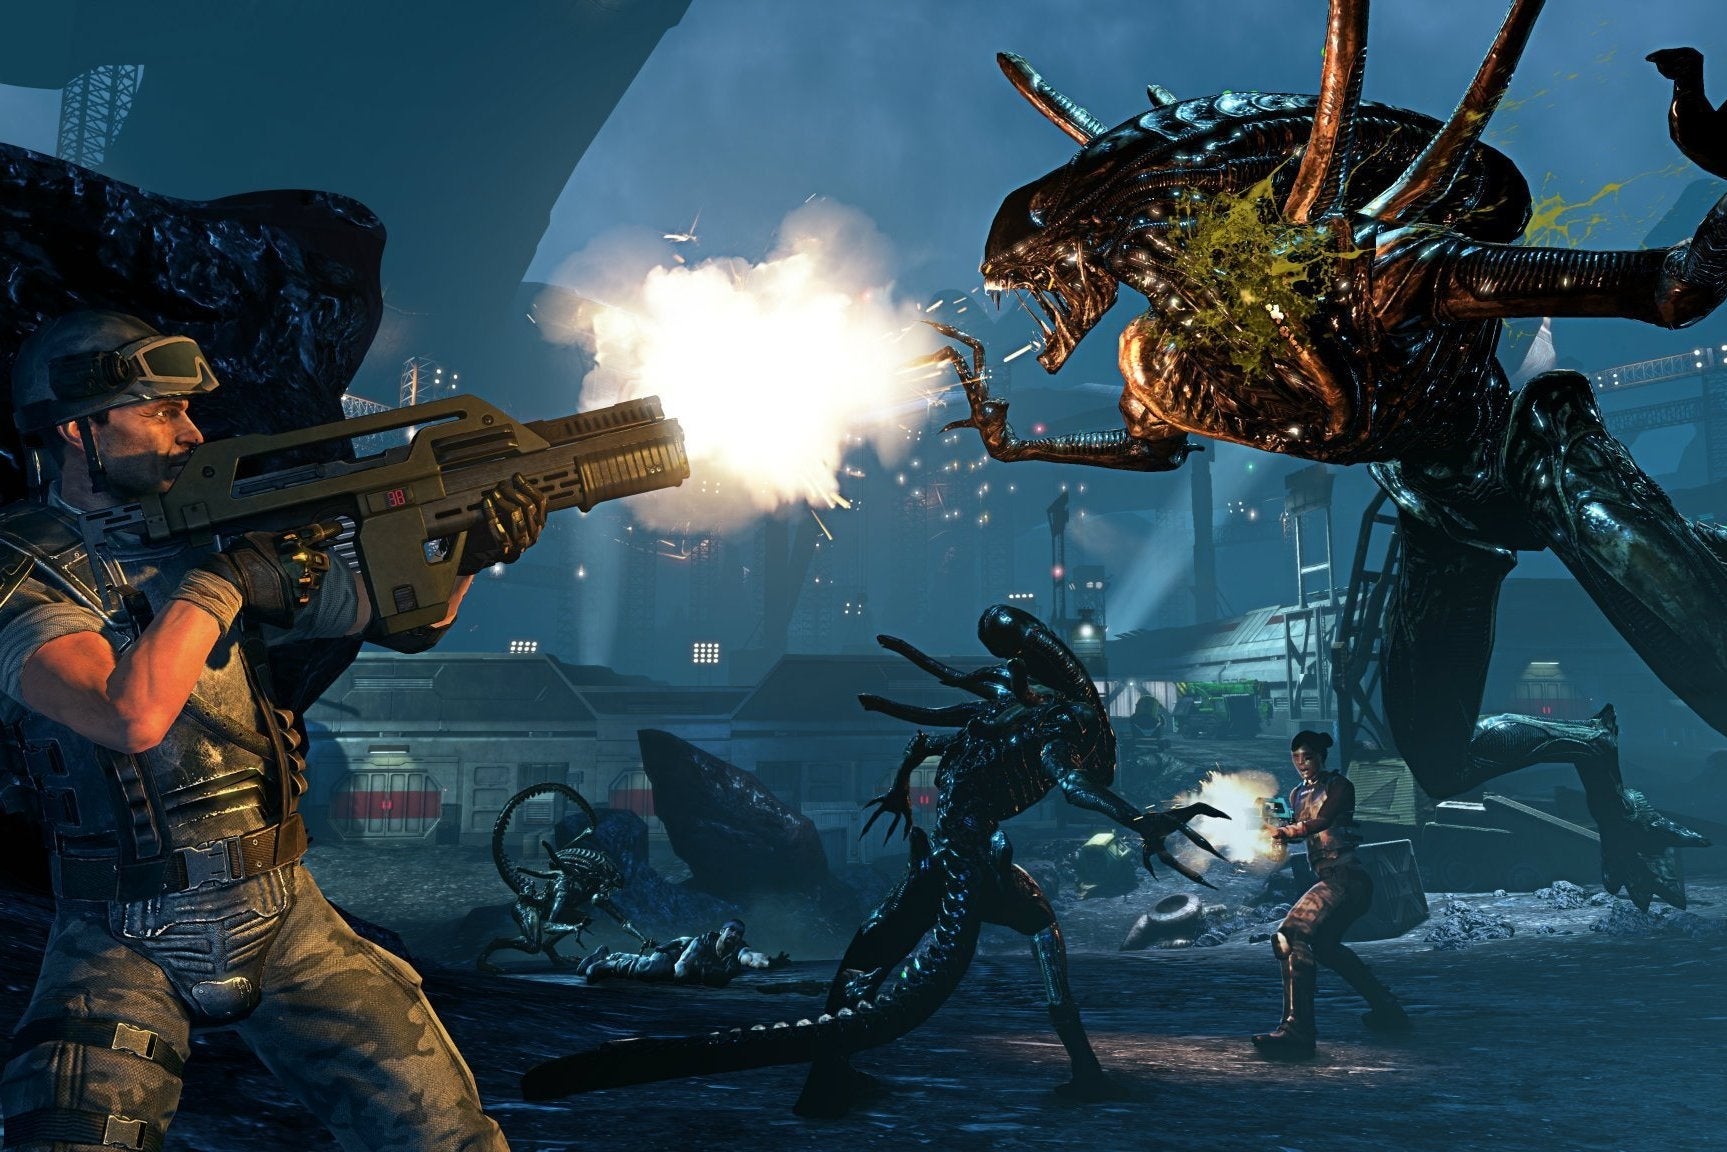 Image for Aliens: Colonial Marines and AvP (2010) have vanished from Steam